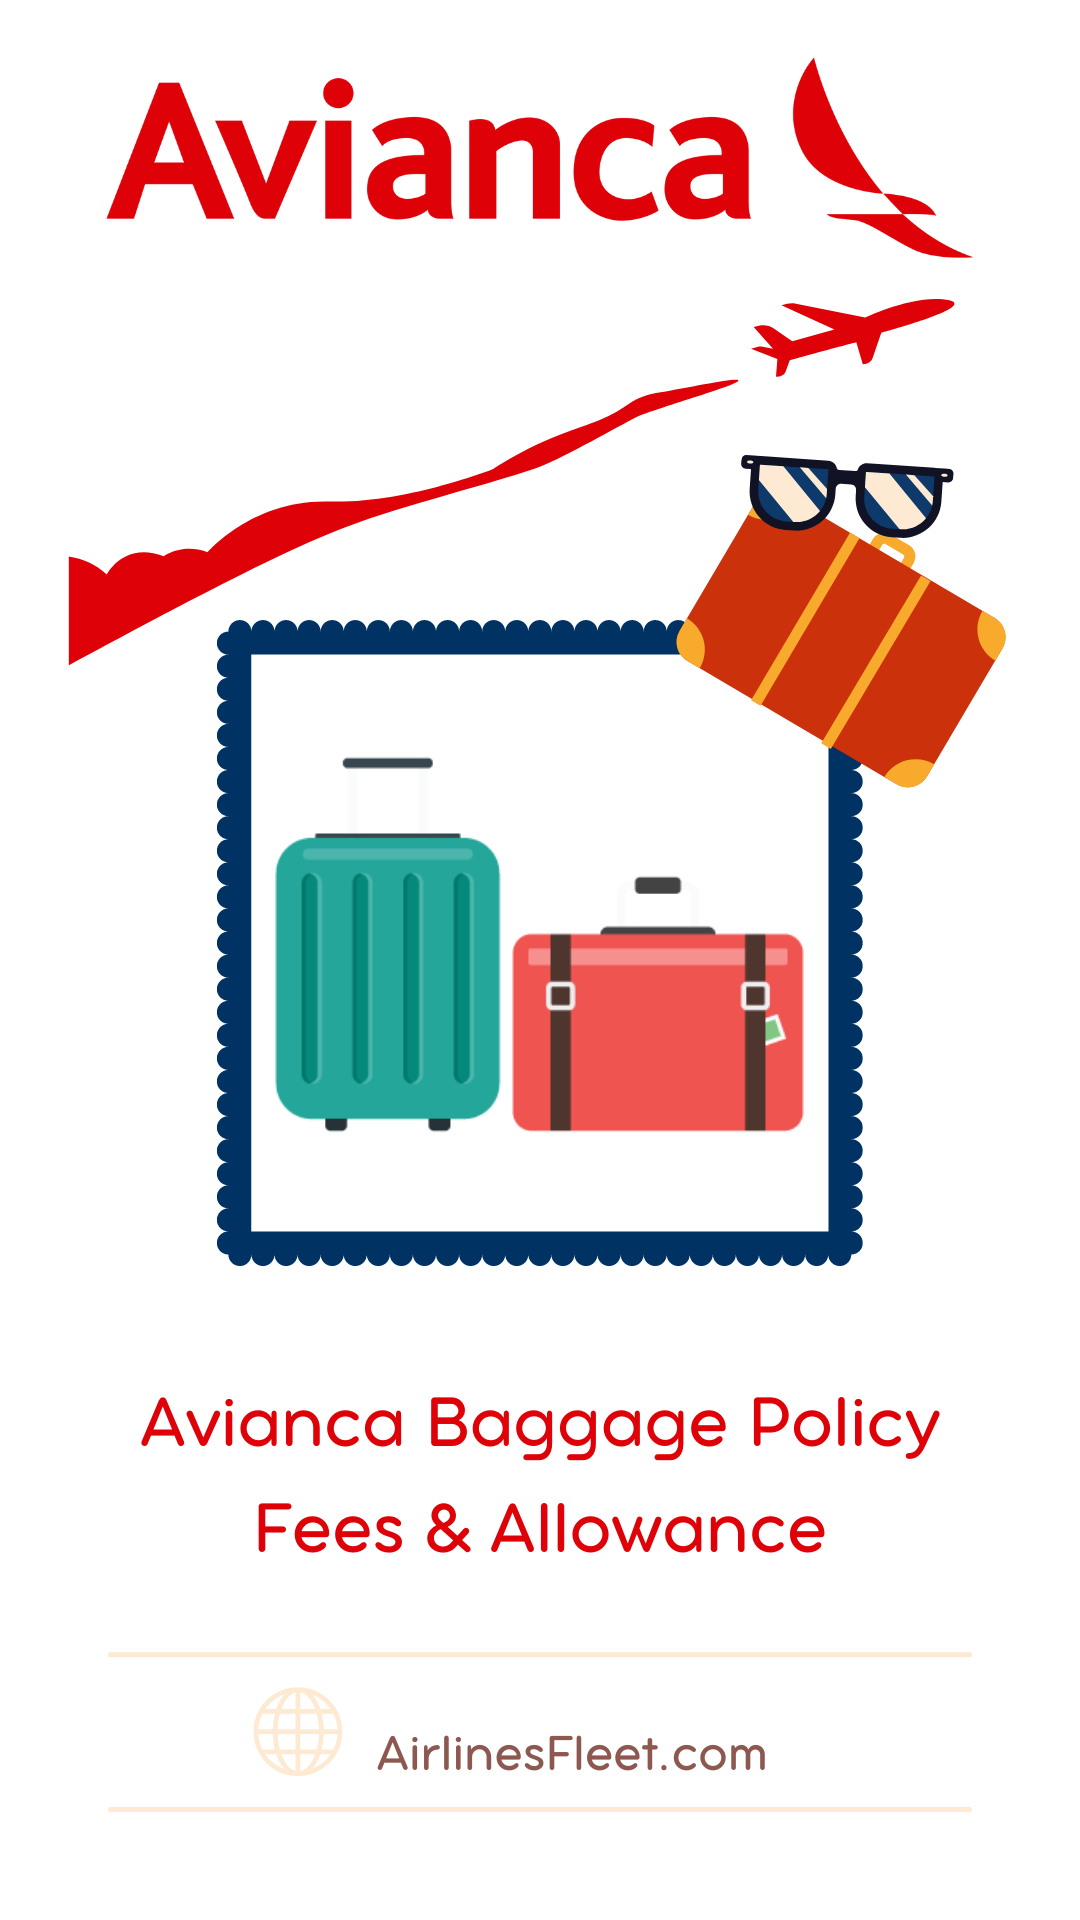 Avianca Baggage Policy Fees & Allowance